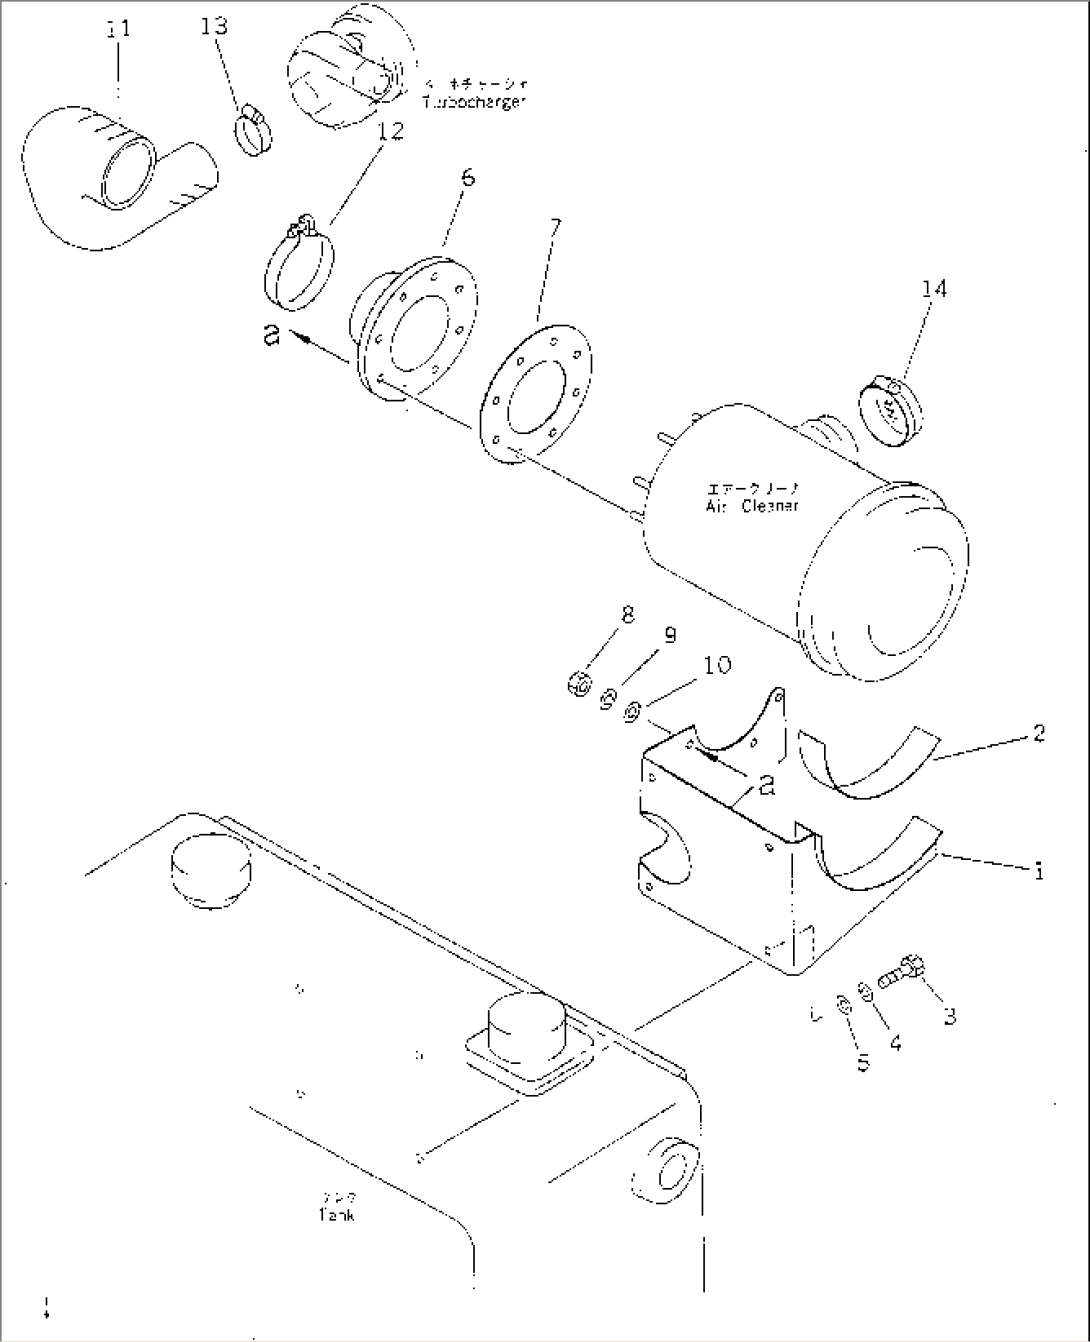 AIR CLEANER CONNECTION(#10001-10043)